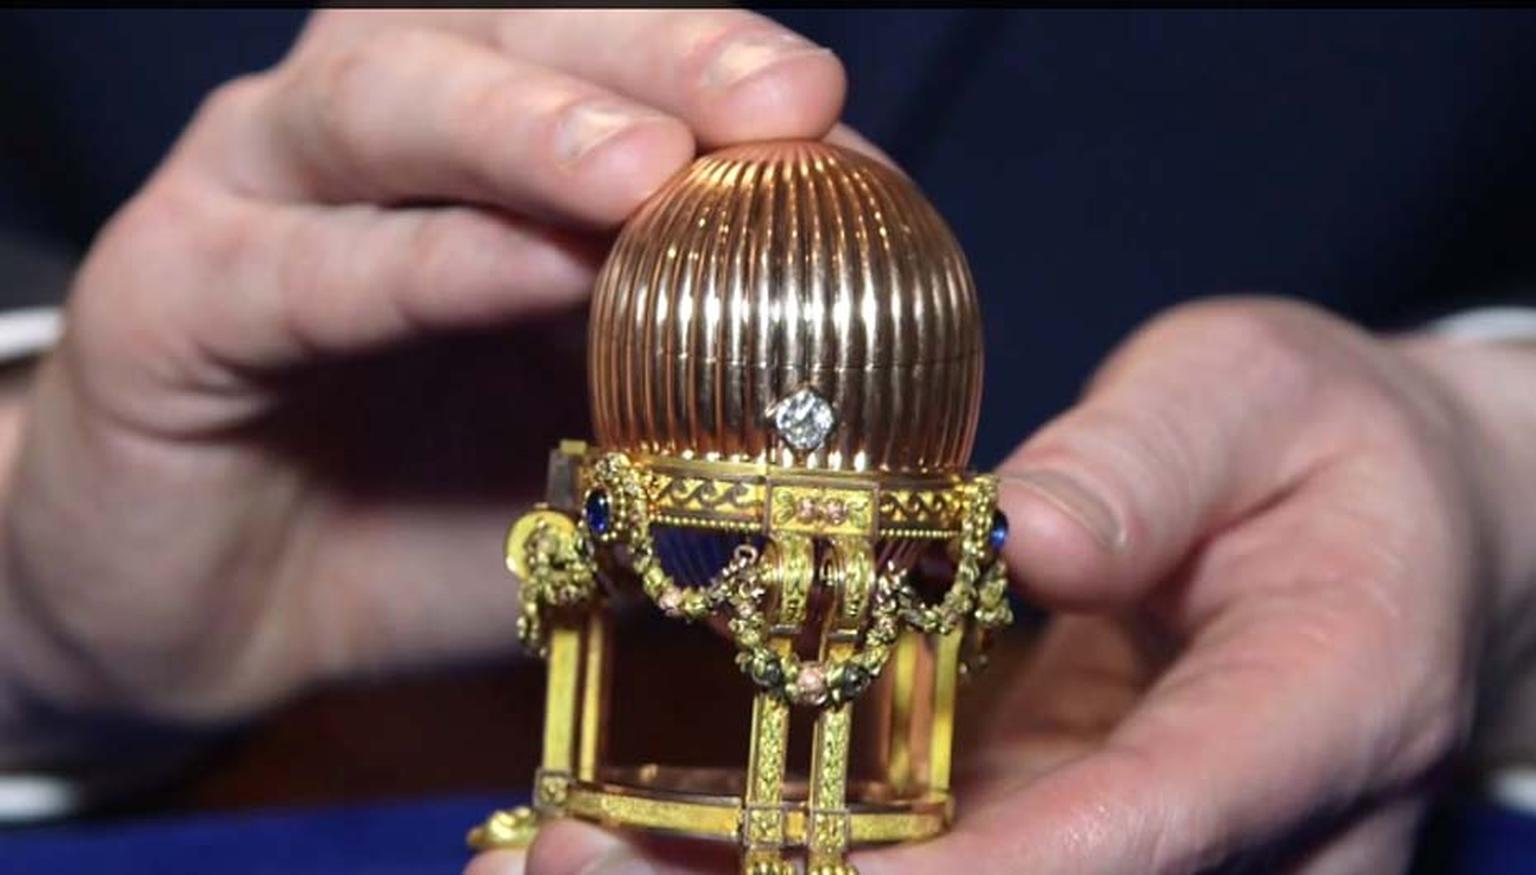 Shaped as a hen’s egg, the Imperial Fabergé Easter Egg is an expression of Easter and the resurrection of Christ.